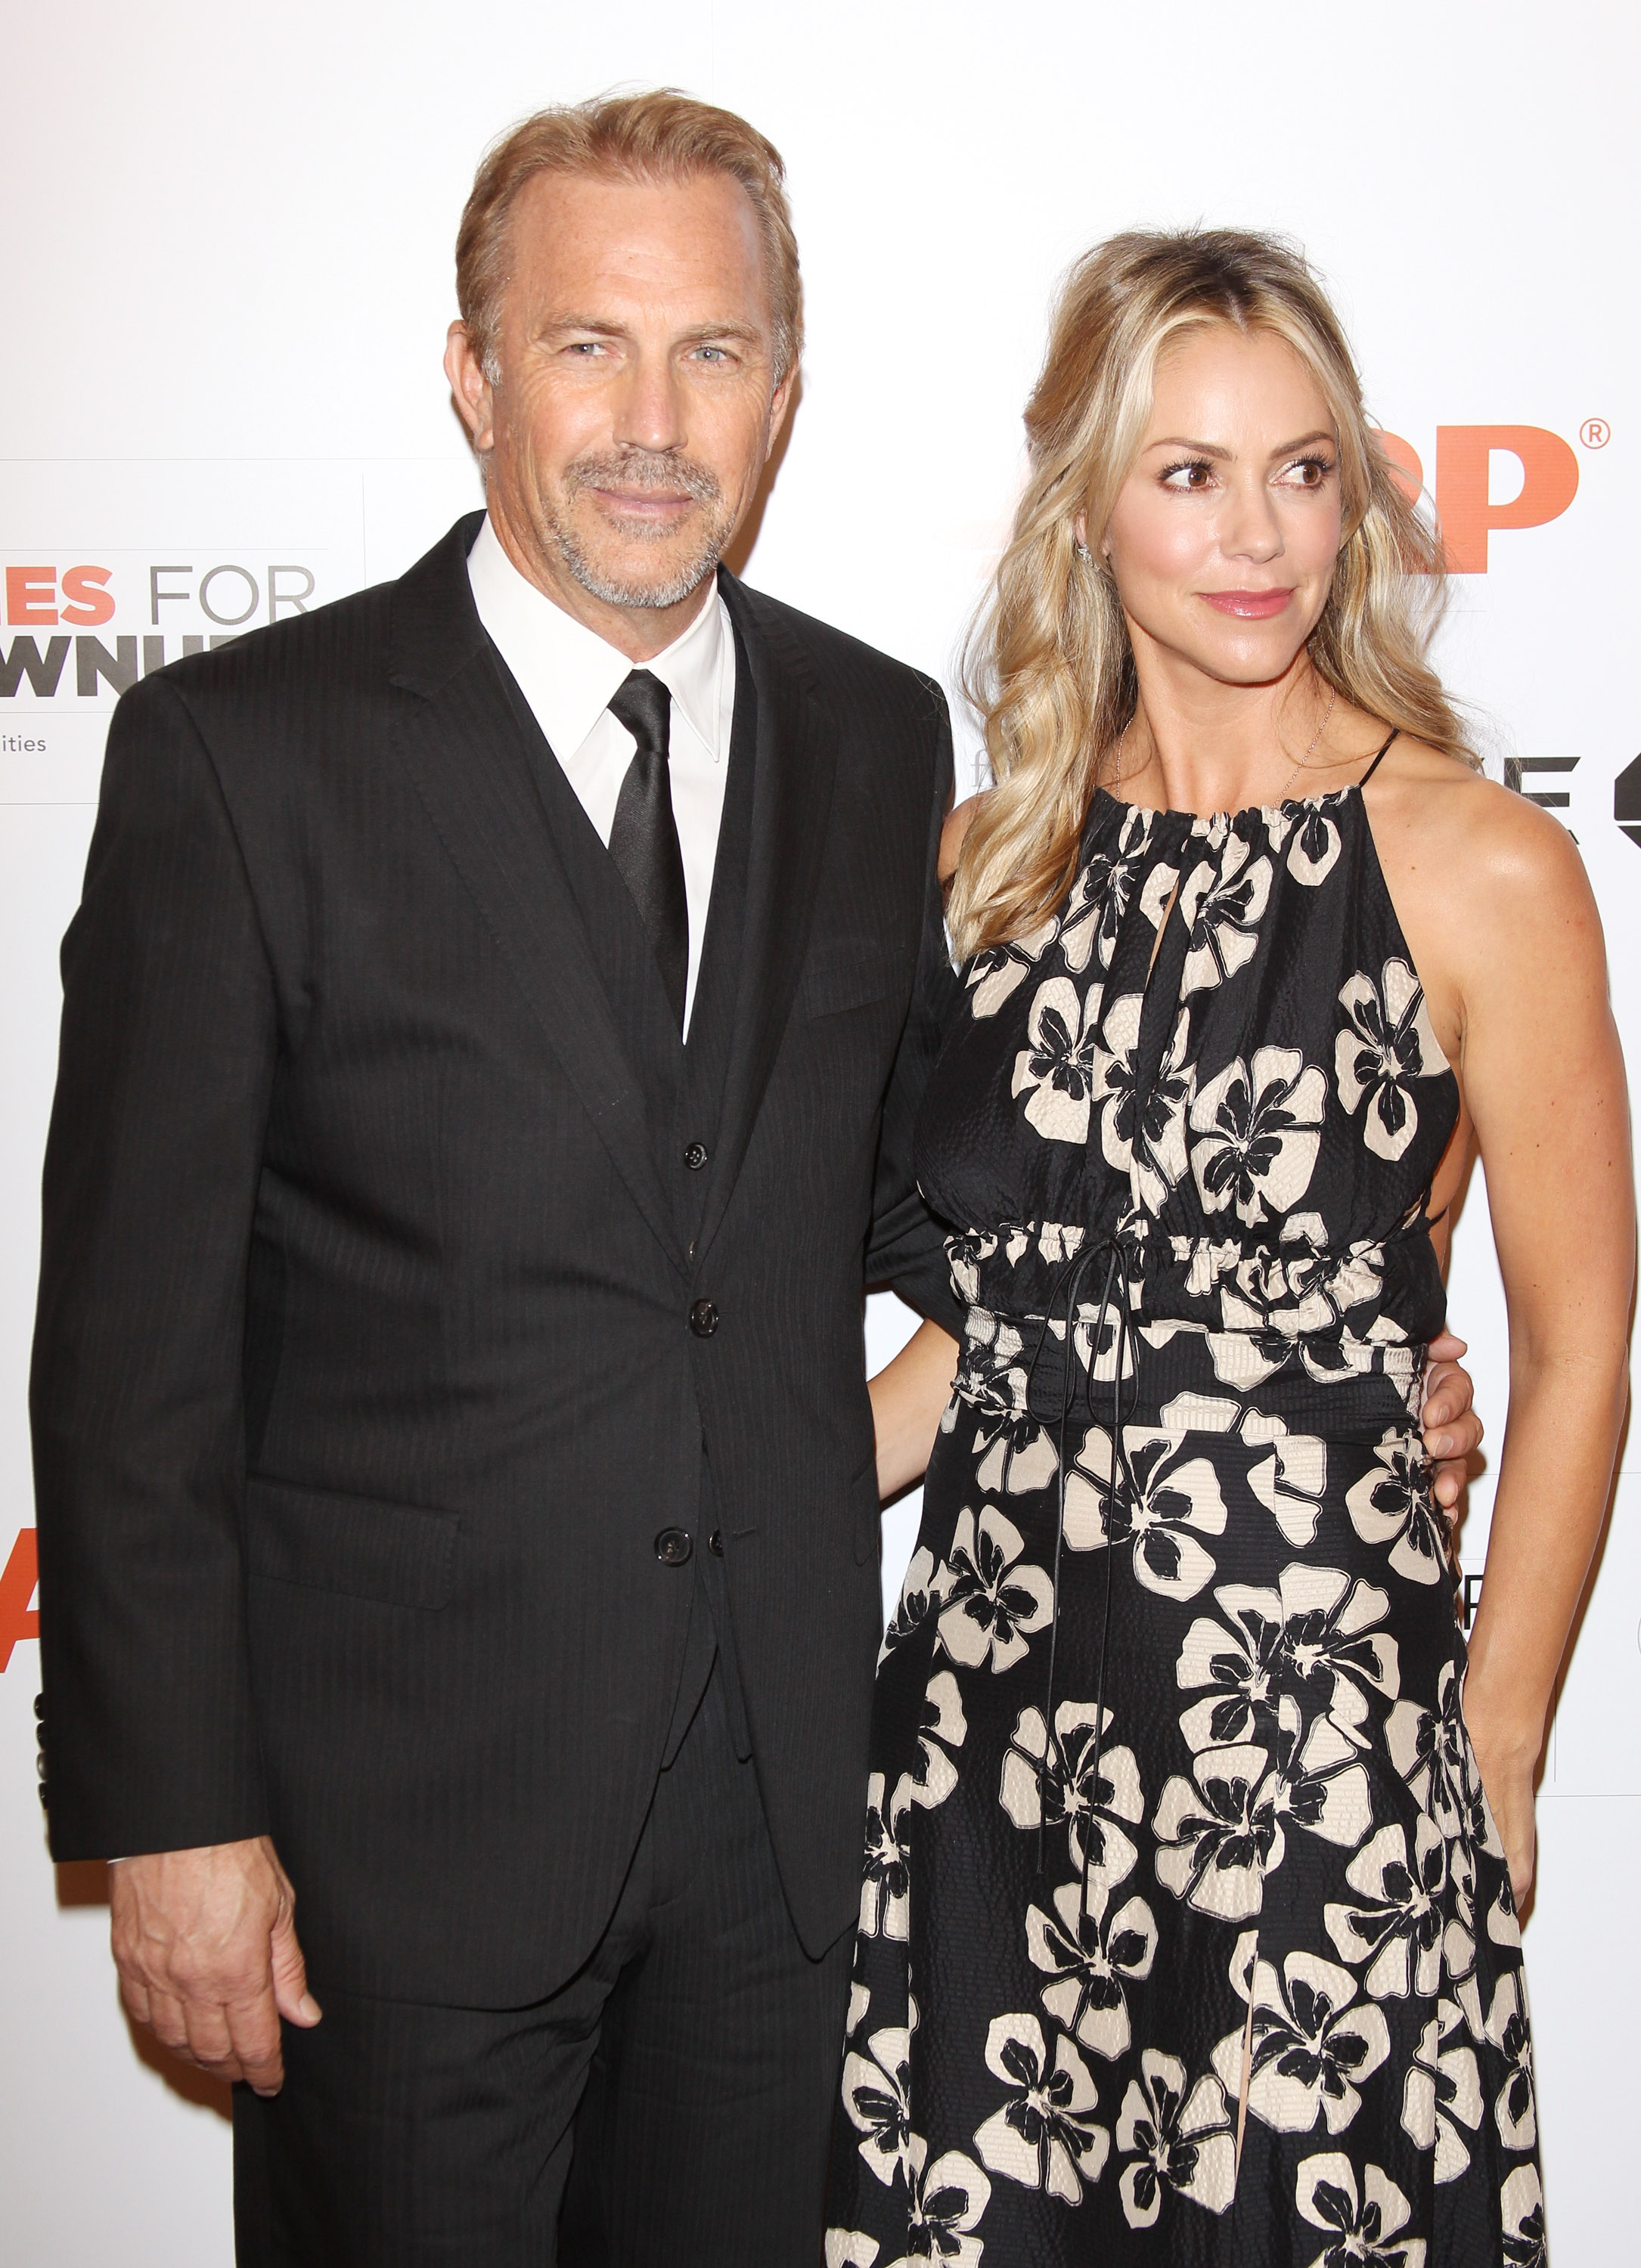 Kevin Costner und Christine Baumgartner bei der AARP 14th Annual "Movies For Grownups" Awards Gala in Beverly Hills, 2015 | Quelle: Getty Images